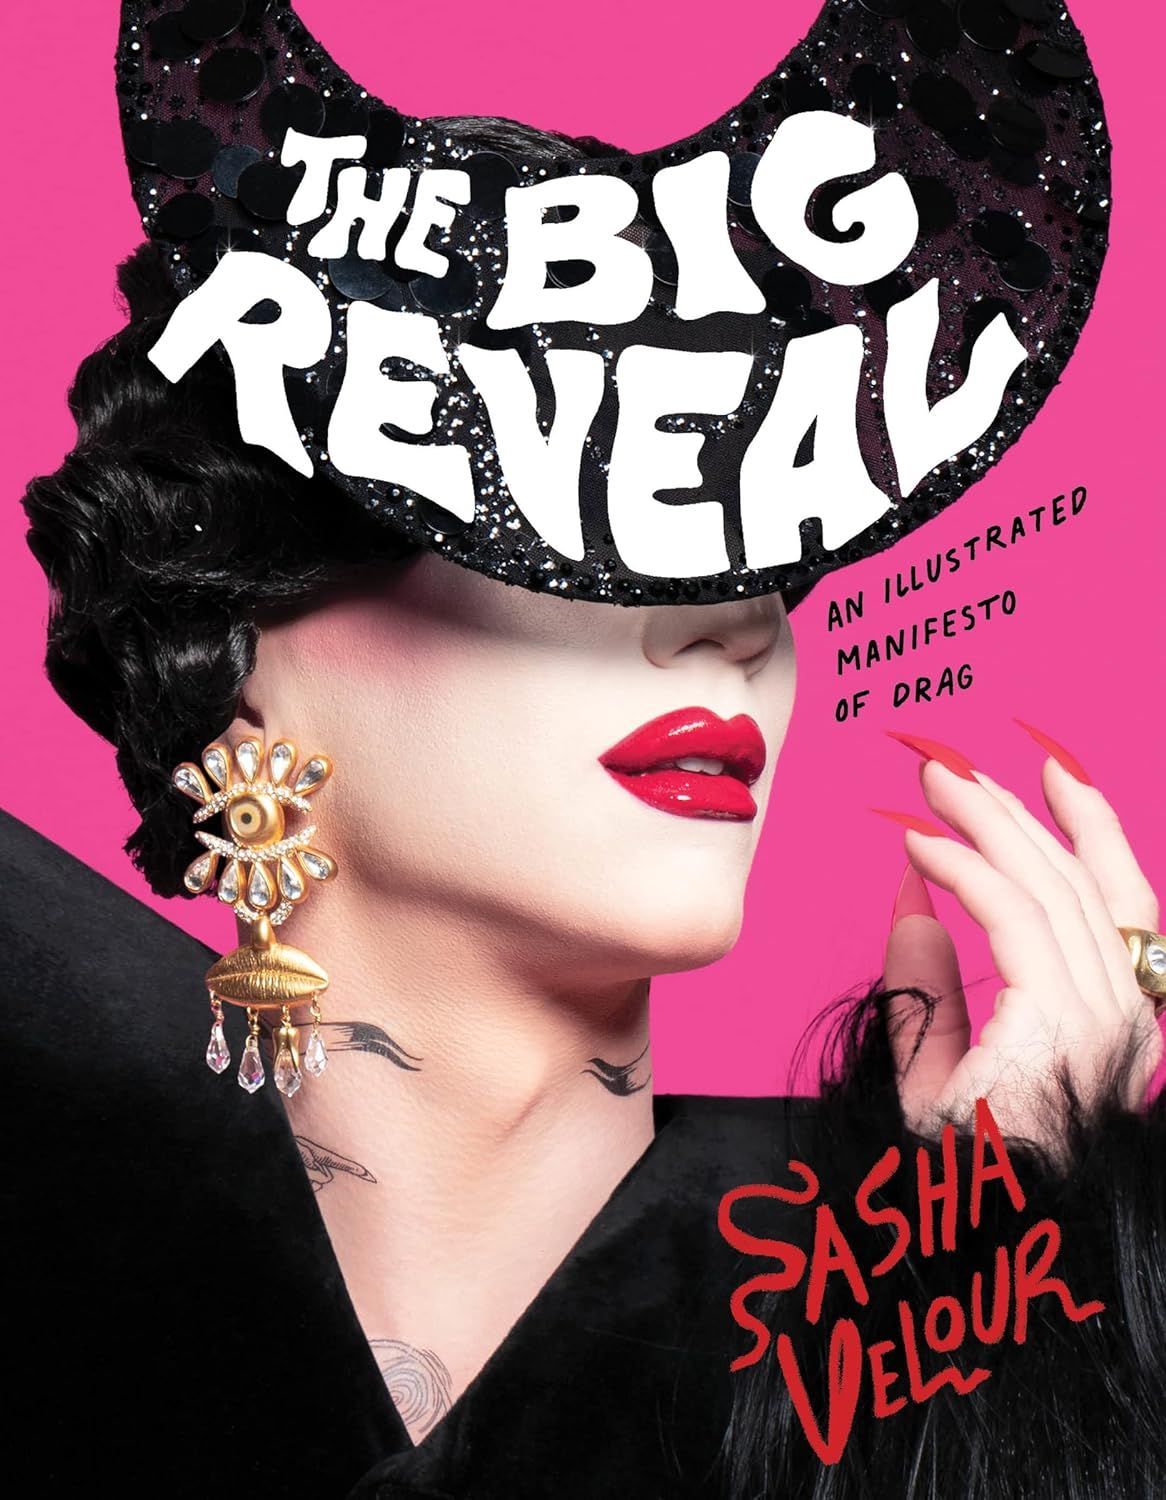 Among the Rose Petals, Queer Possibility: On Sasha Velour’s “The Big Reveal”